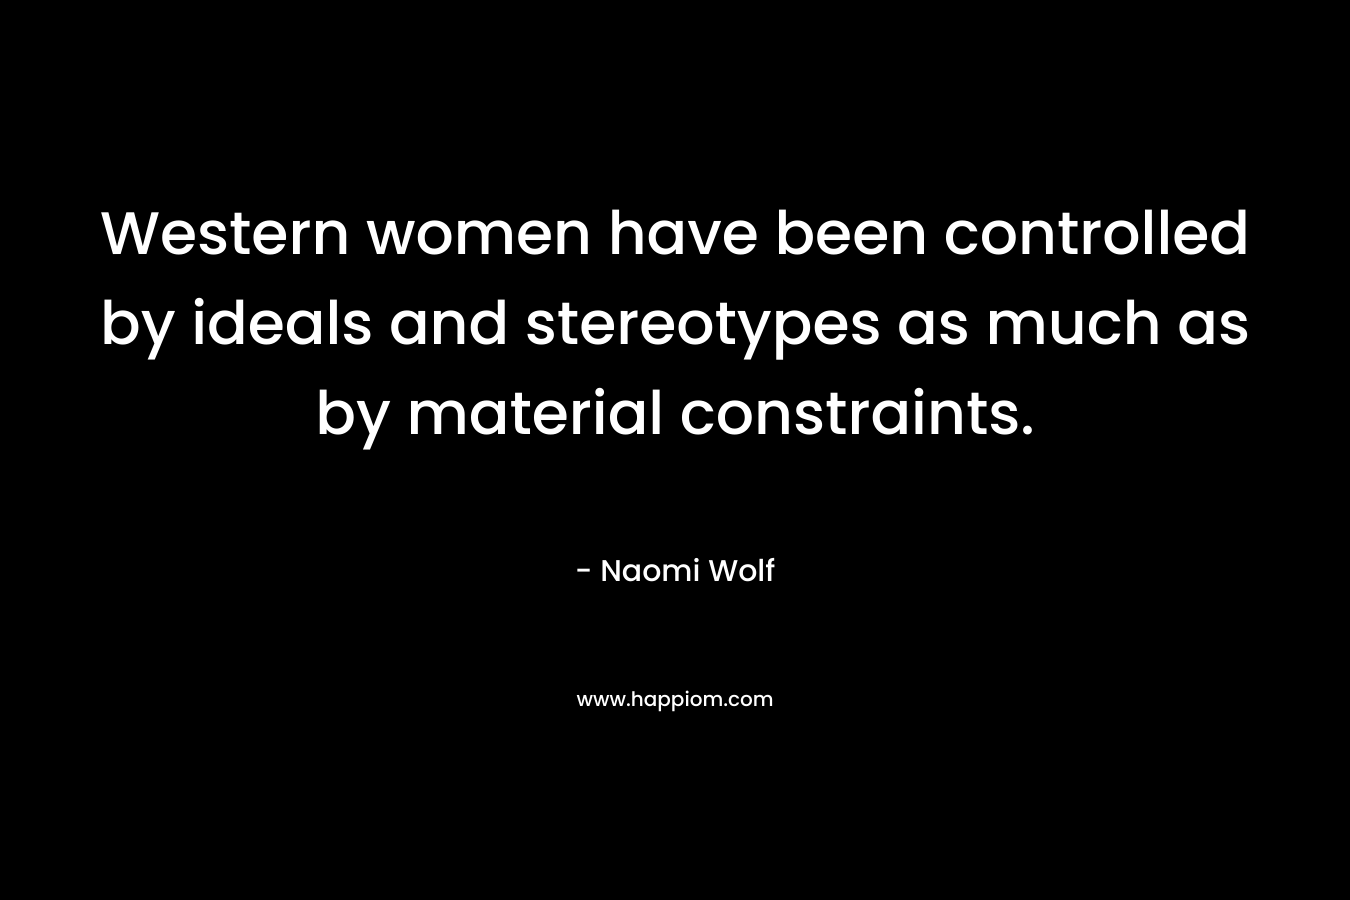 Western women have been controlled by ideals and stereotypes as much as by material constraints.